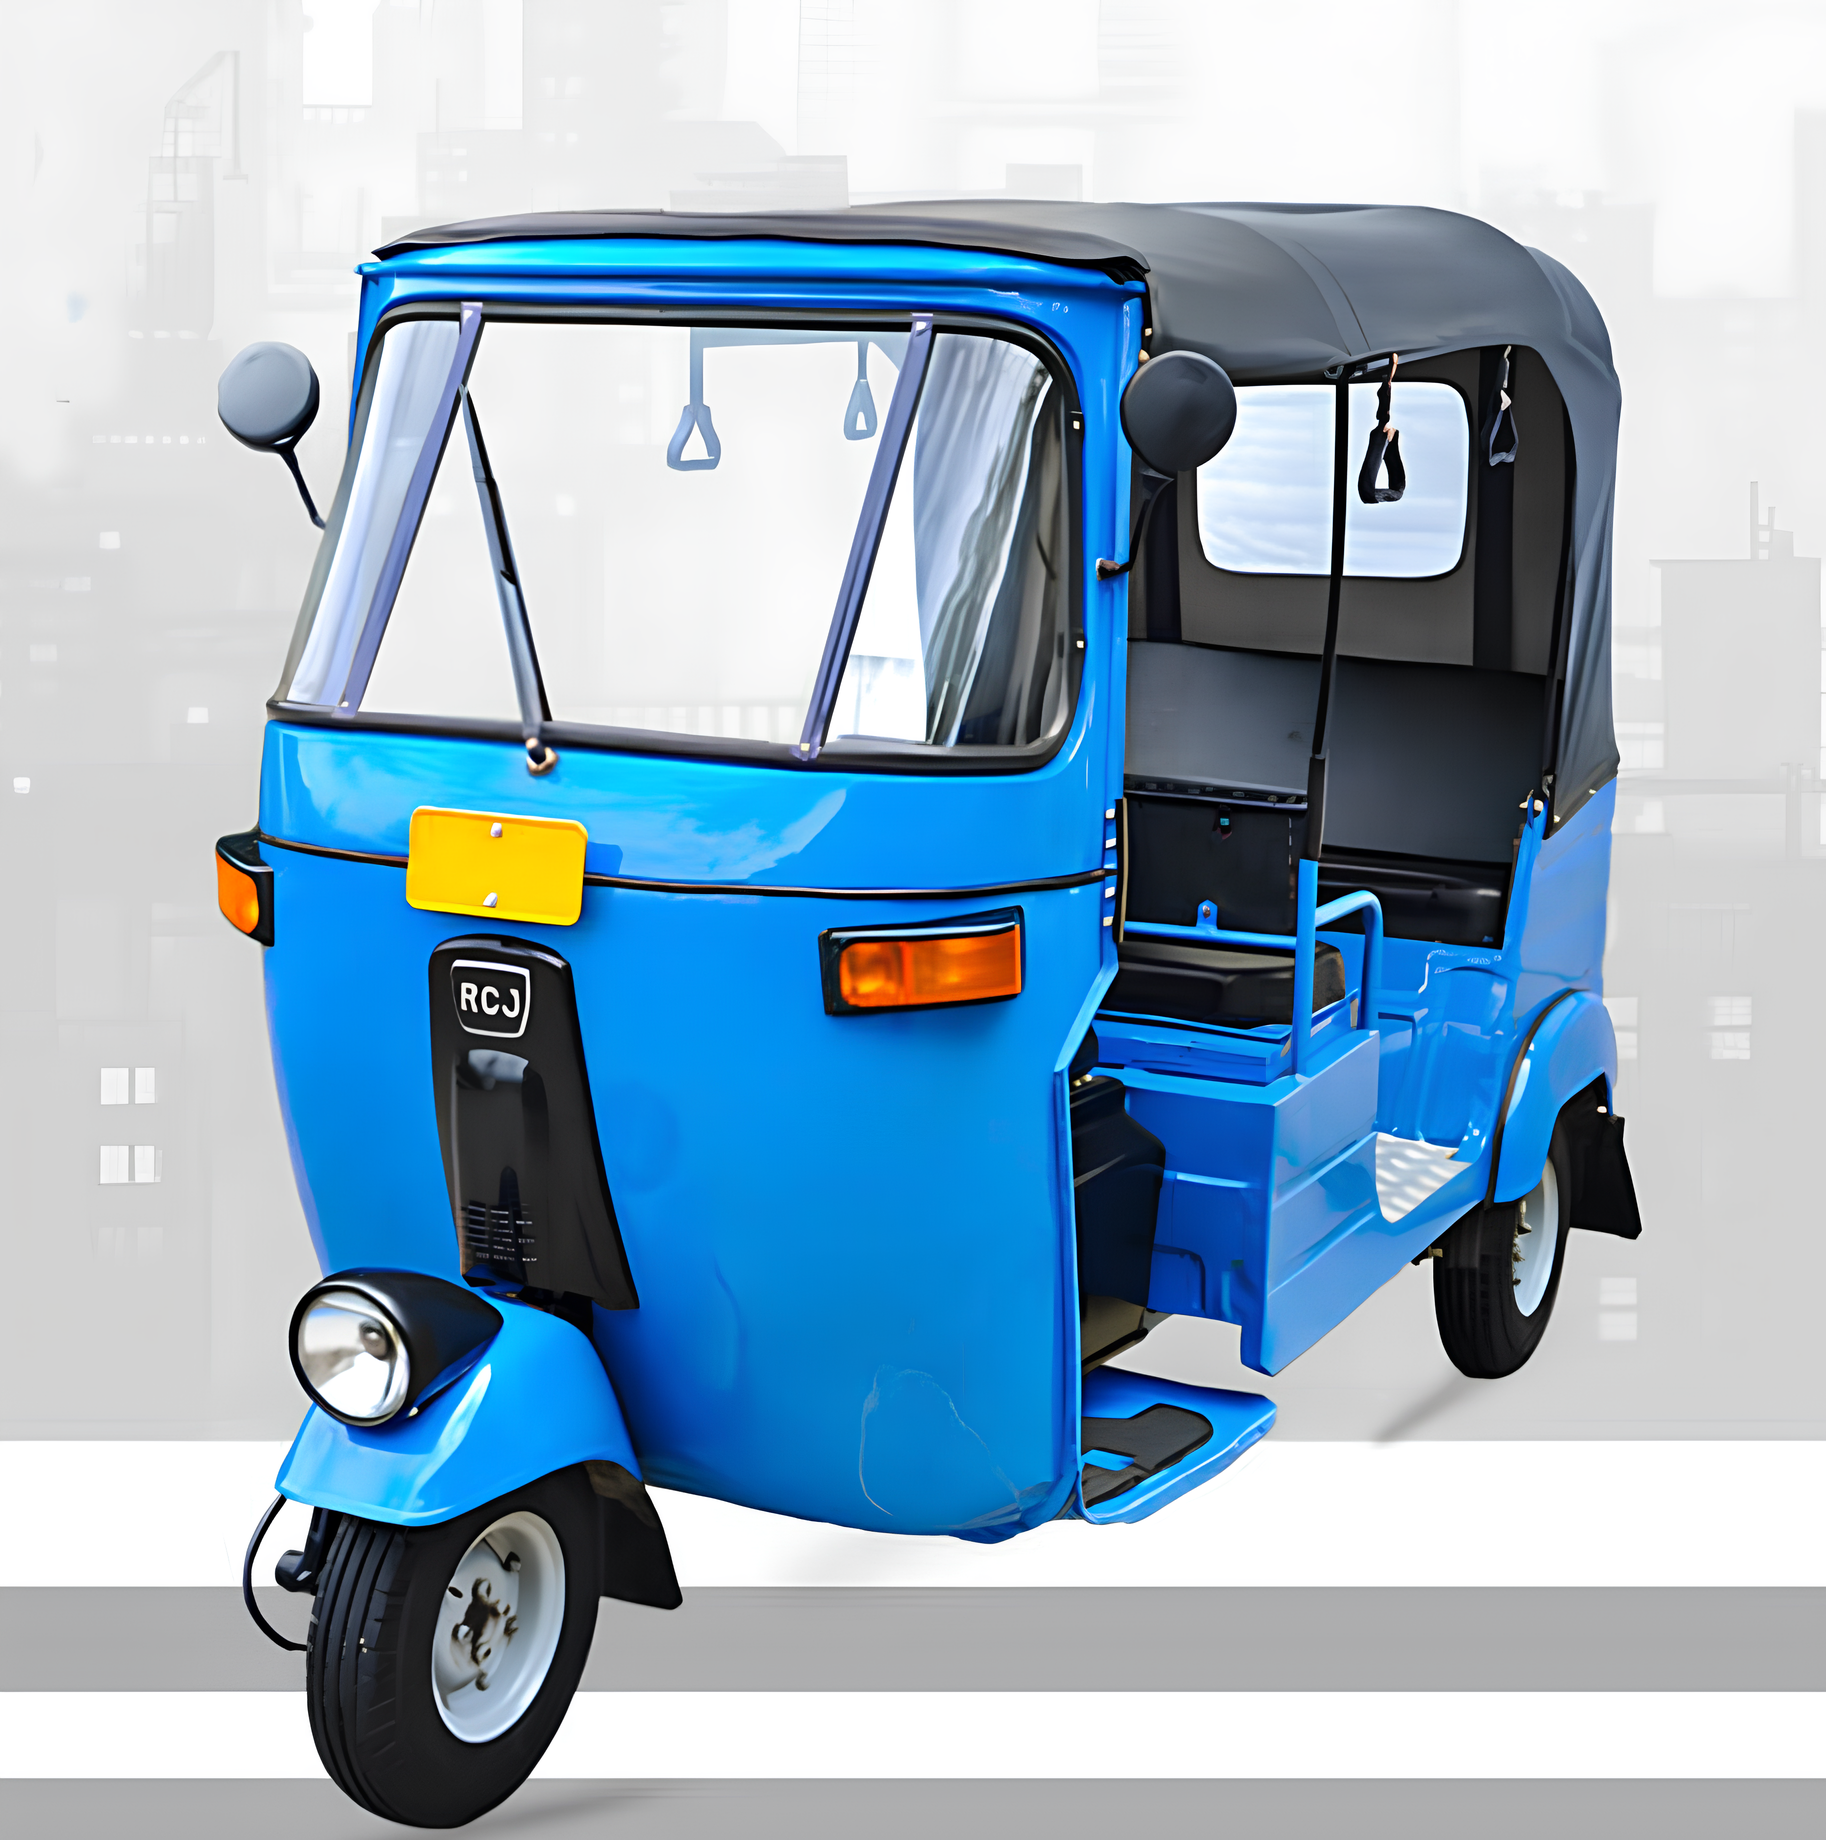 <p>"The eAutos and eRickshaws are emission-free transportation with positive environmental impact. These electric vehicles stand out for their cost-effective operational dynamics, making them the preferred choice for both passengers and drivers," he said.</p>